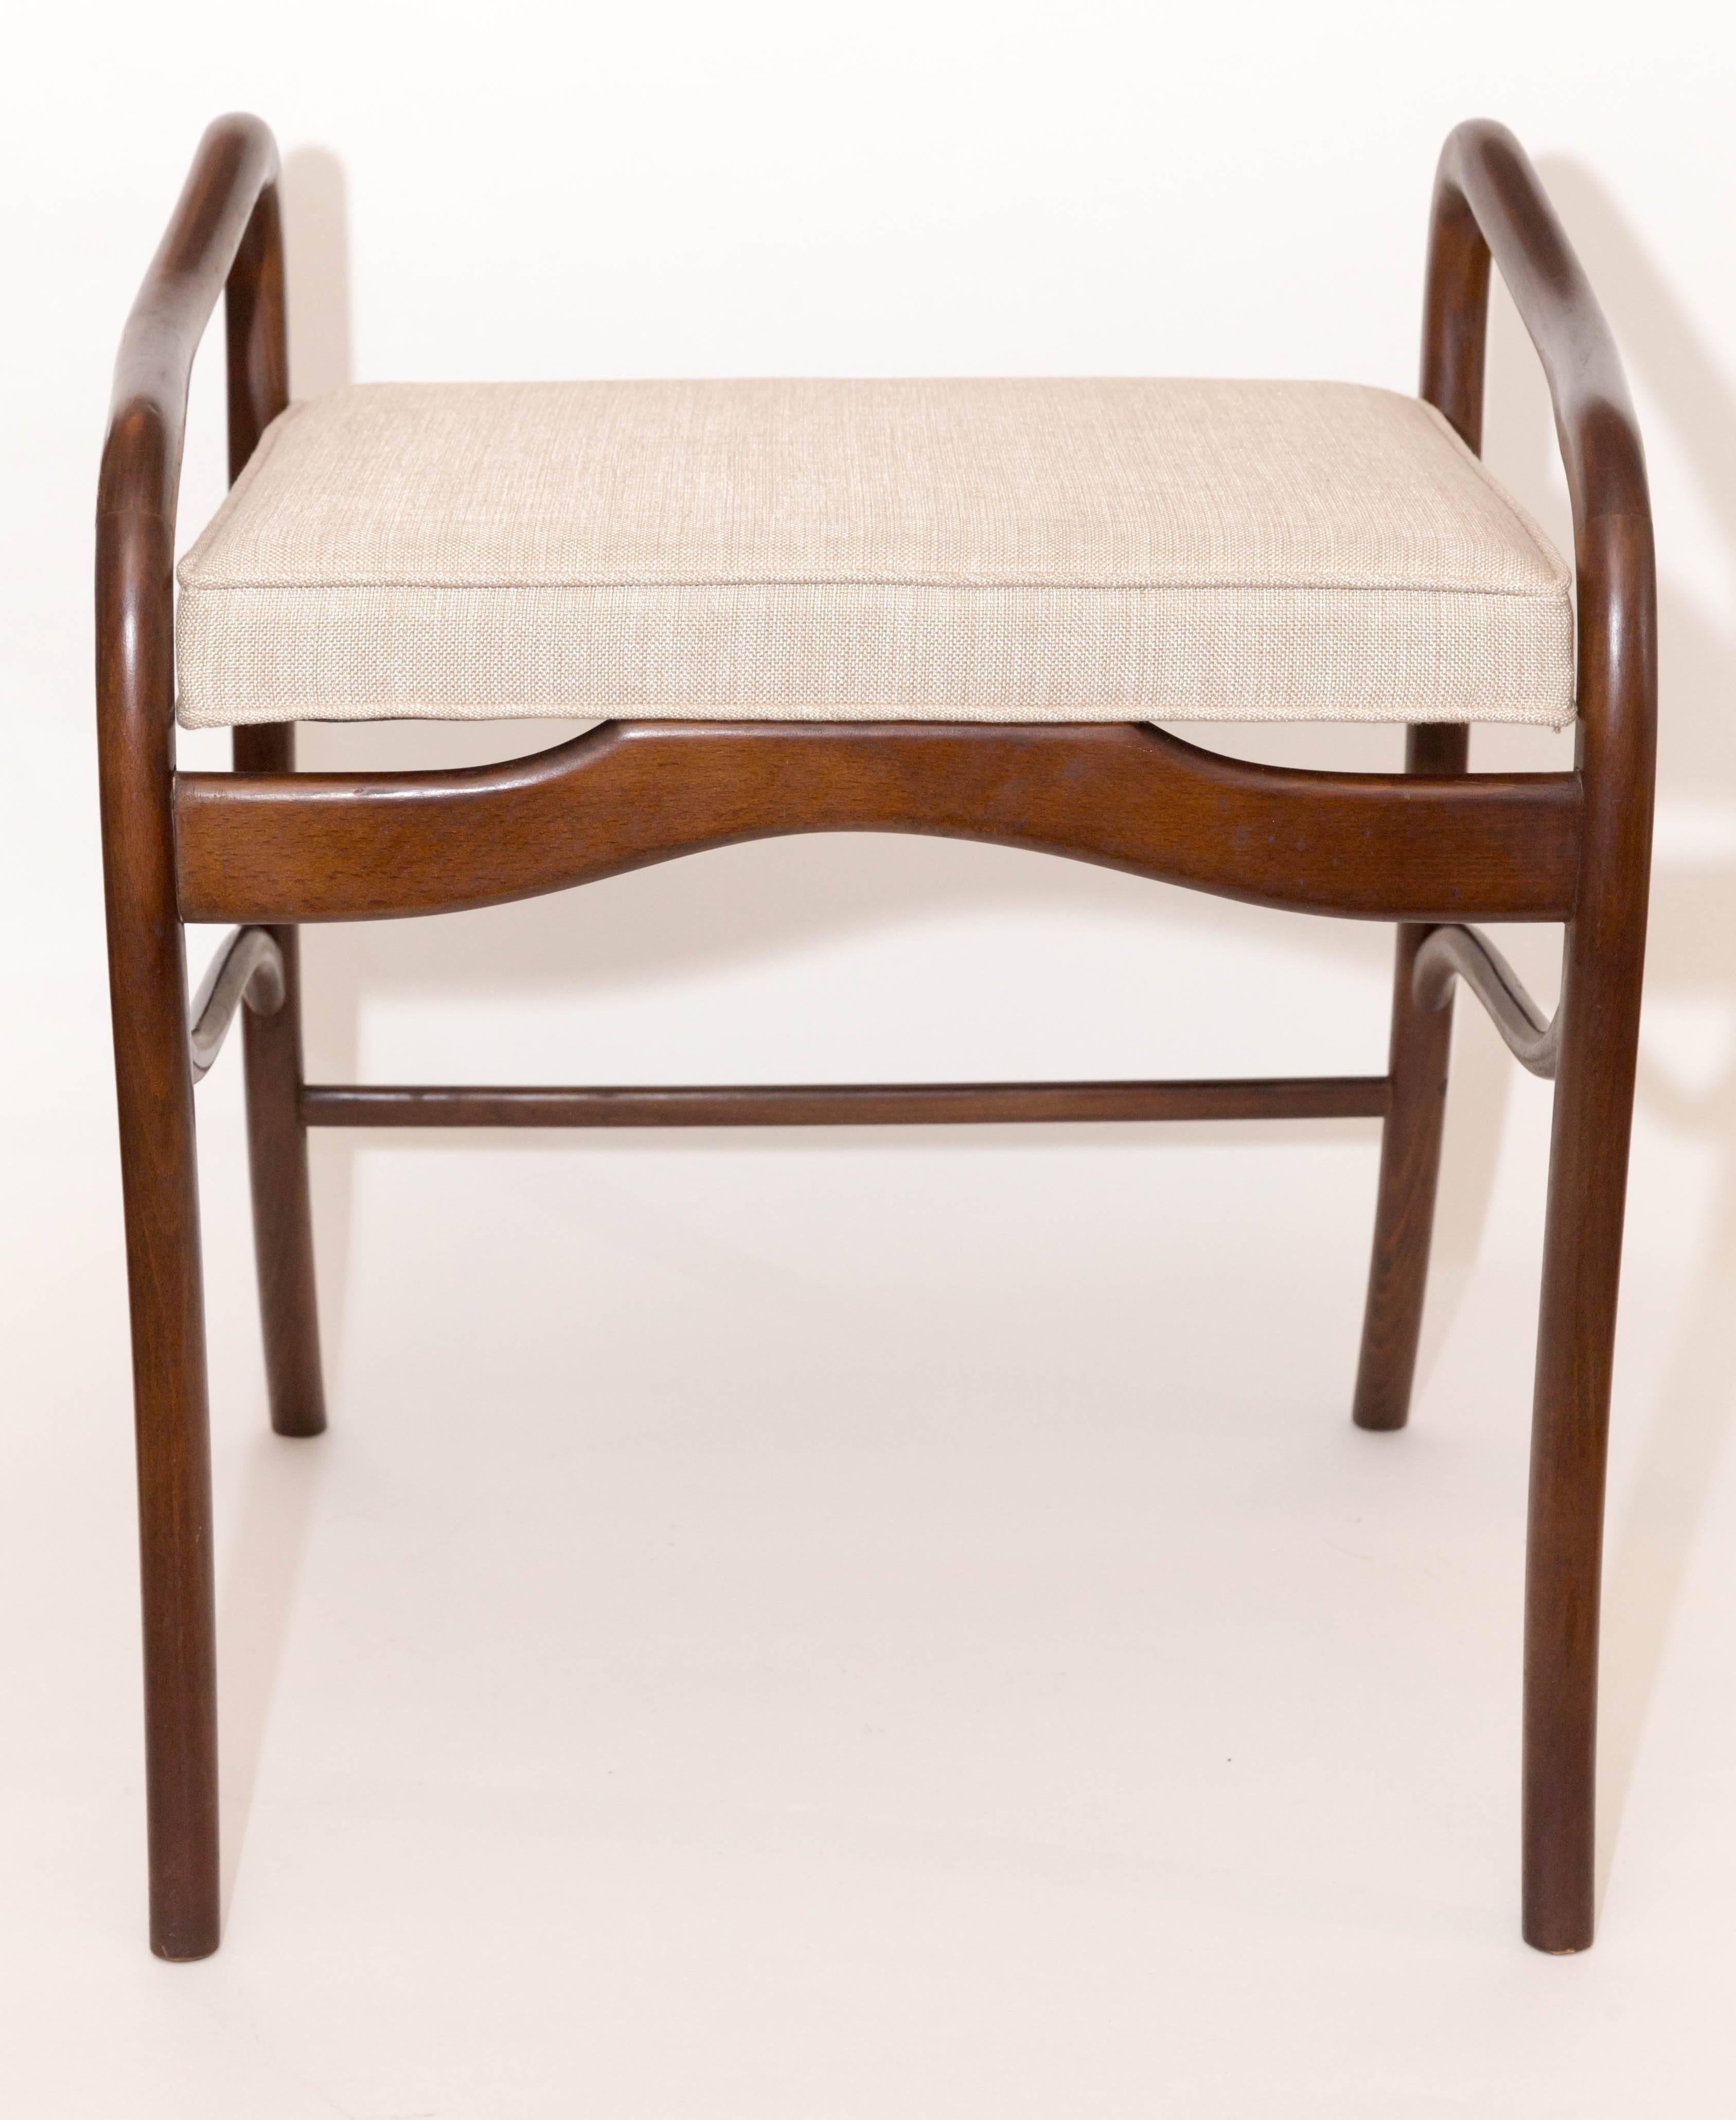 Upholstery Curvilinear Wood Benches with Upholstered Seats For Sale